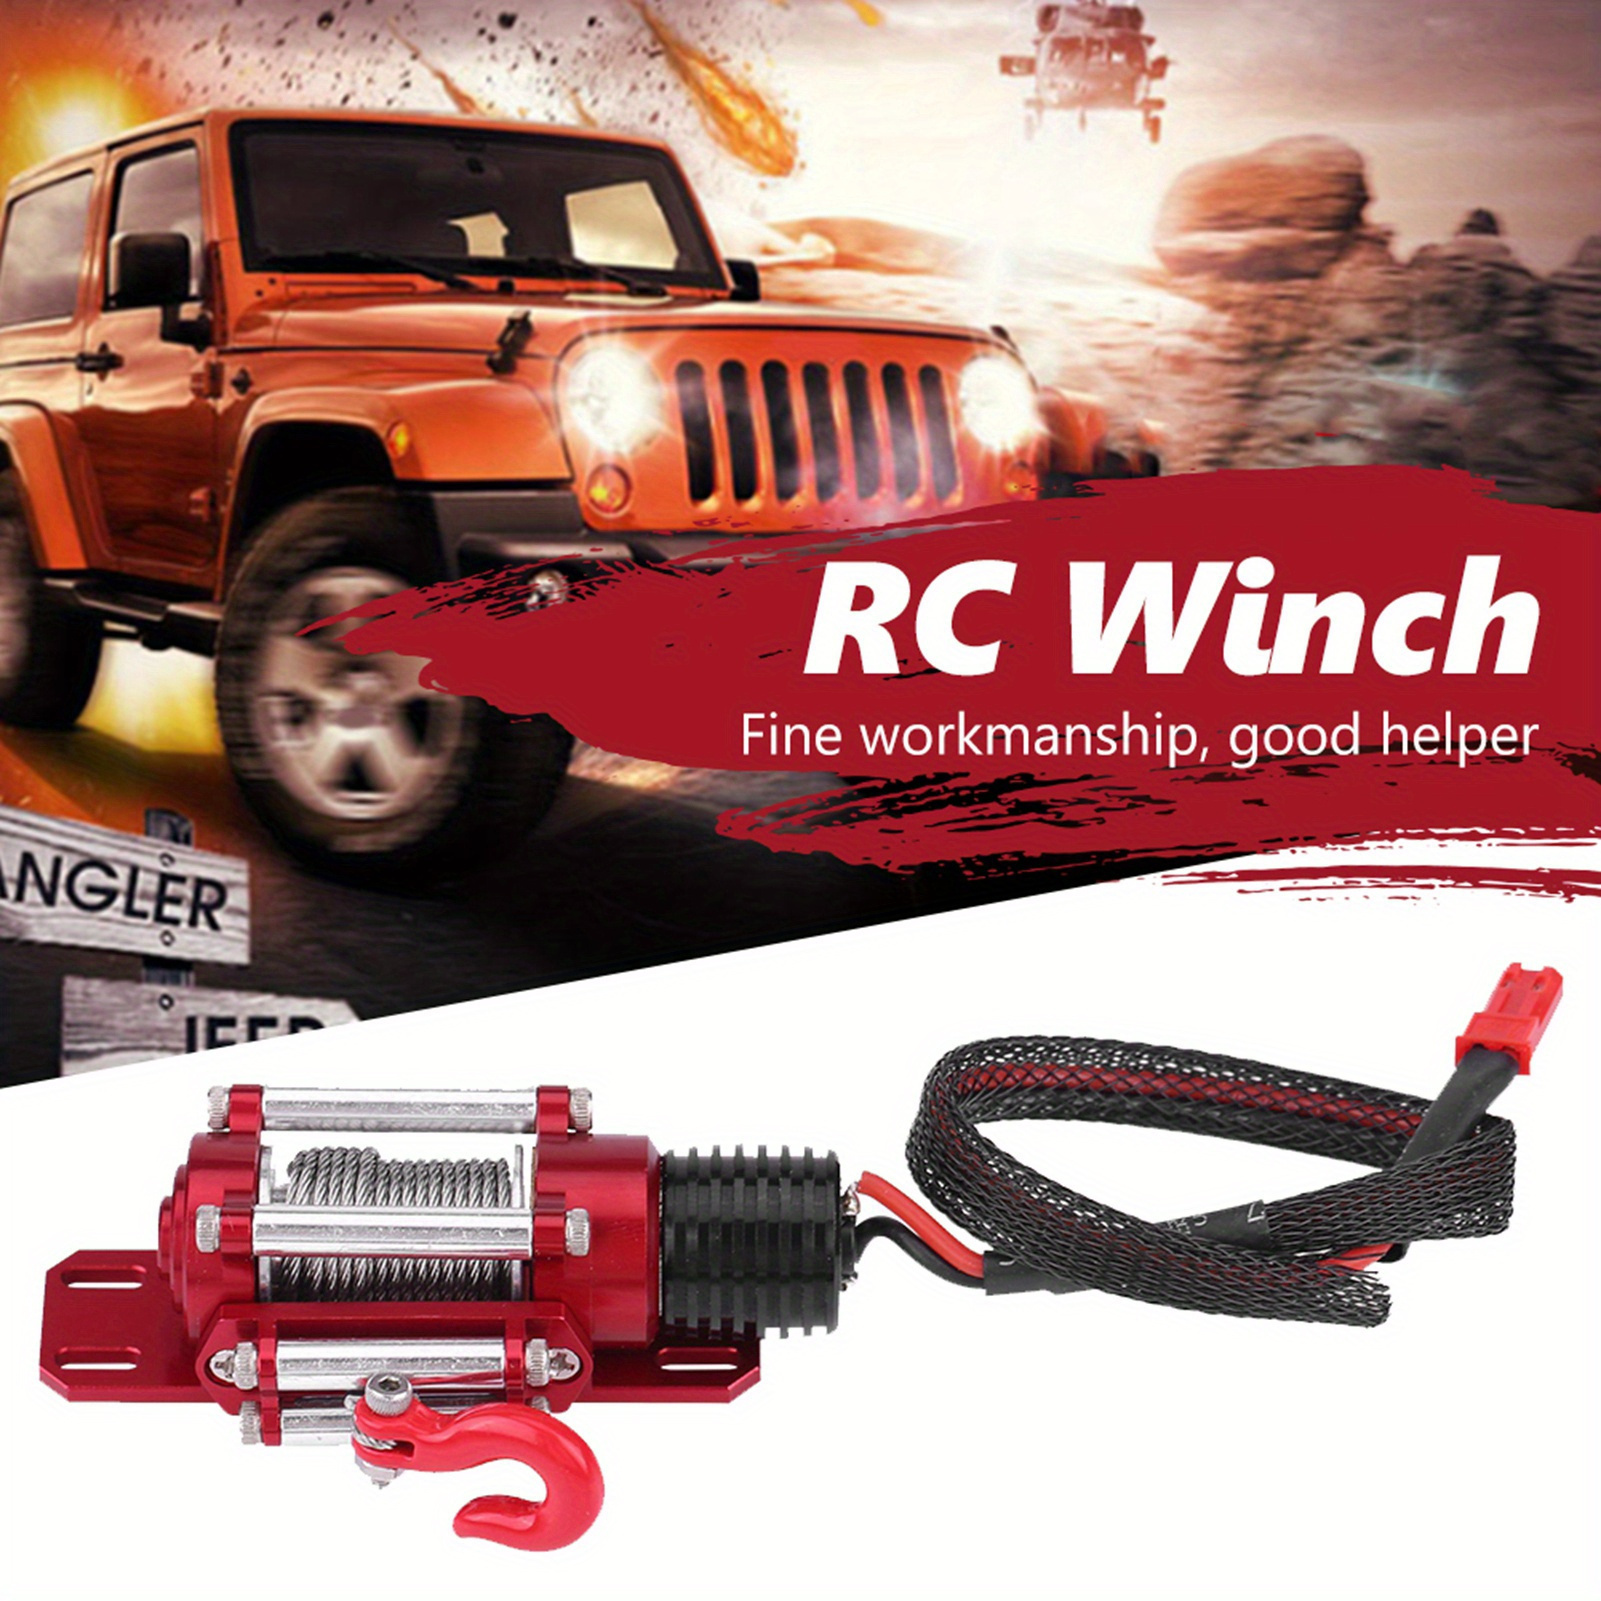 

1/10 Scale Rc Model Vehicle Crawler Car Accessory Metal Winch With Remote Controller, Metal Winch, Bumper Mounted With Winch Remote Control